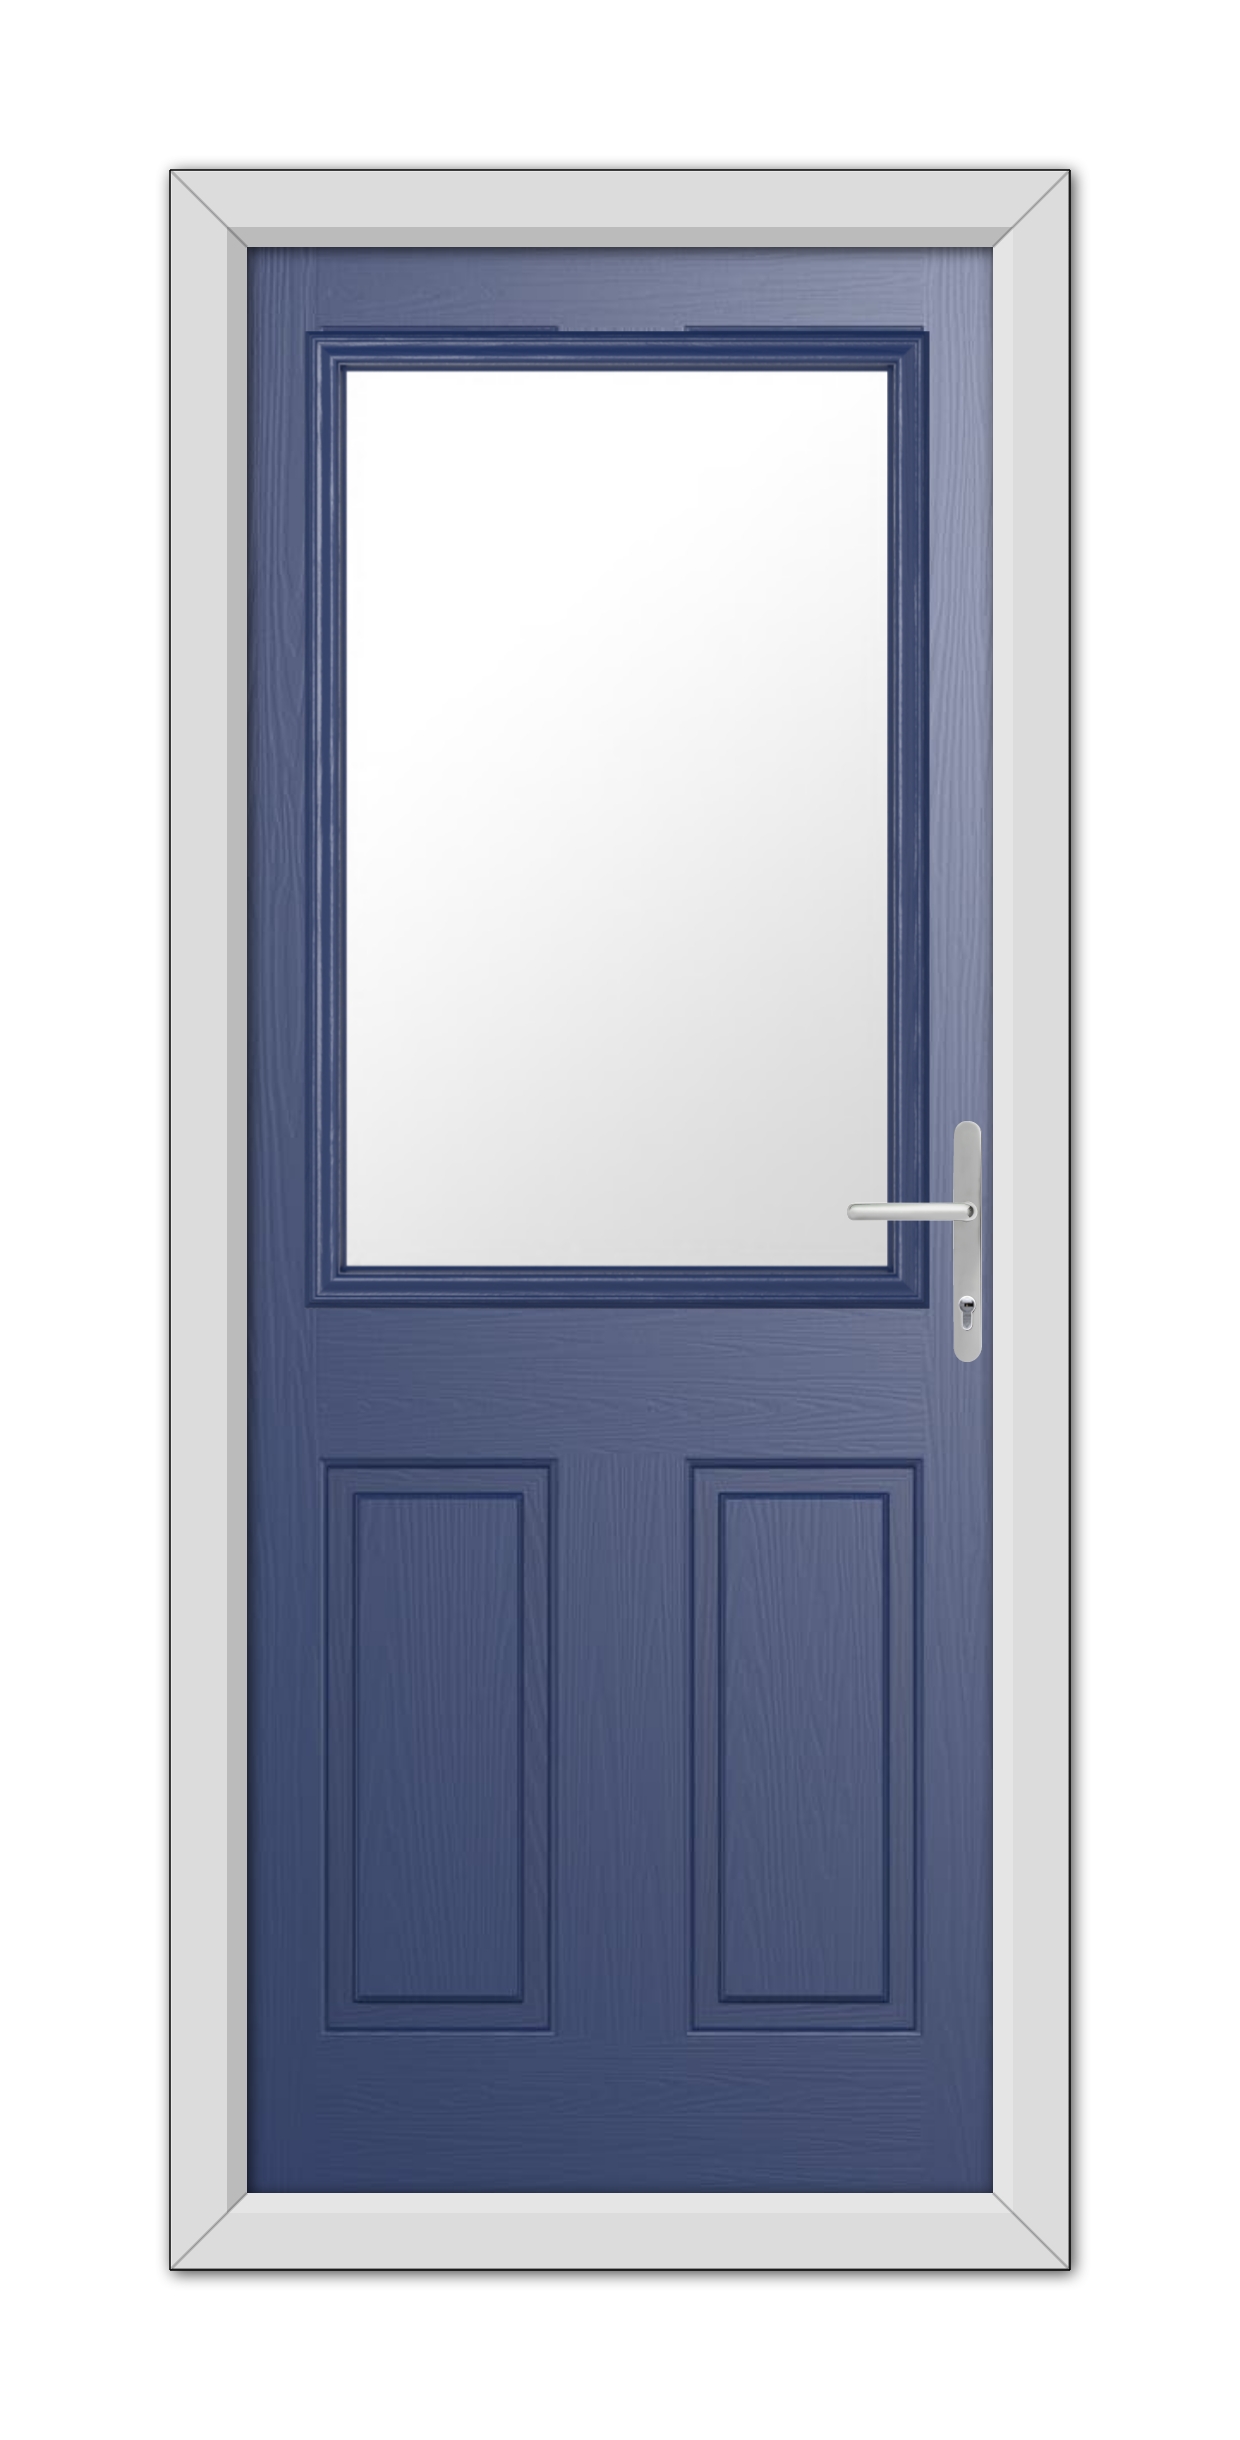 A closed Blue Buxton Composite Door 48mm Timber Core with a large rectangular window at the top, featuring a white frame and handle, against a white background.